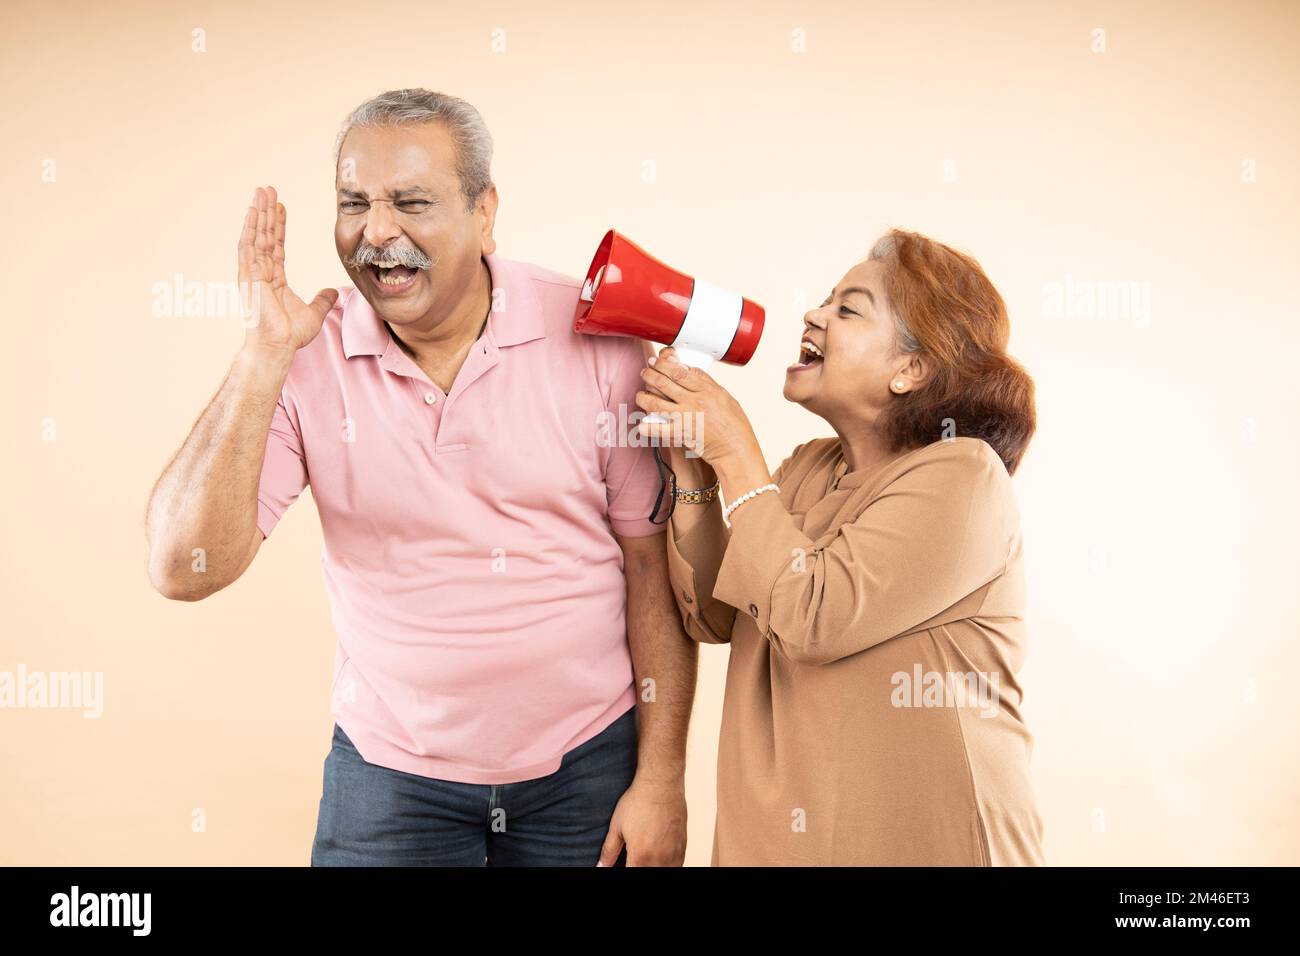 Senior Indian Woman Scream Or Shouting At Man In Megaphone Isolated On